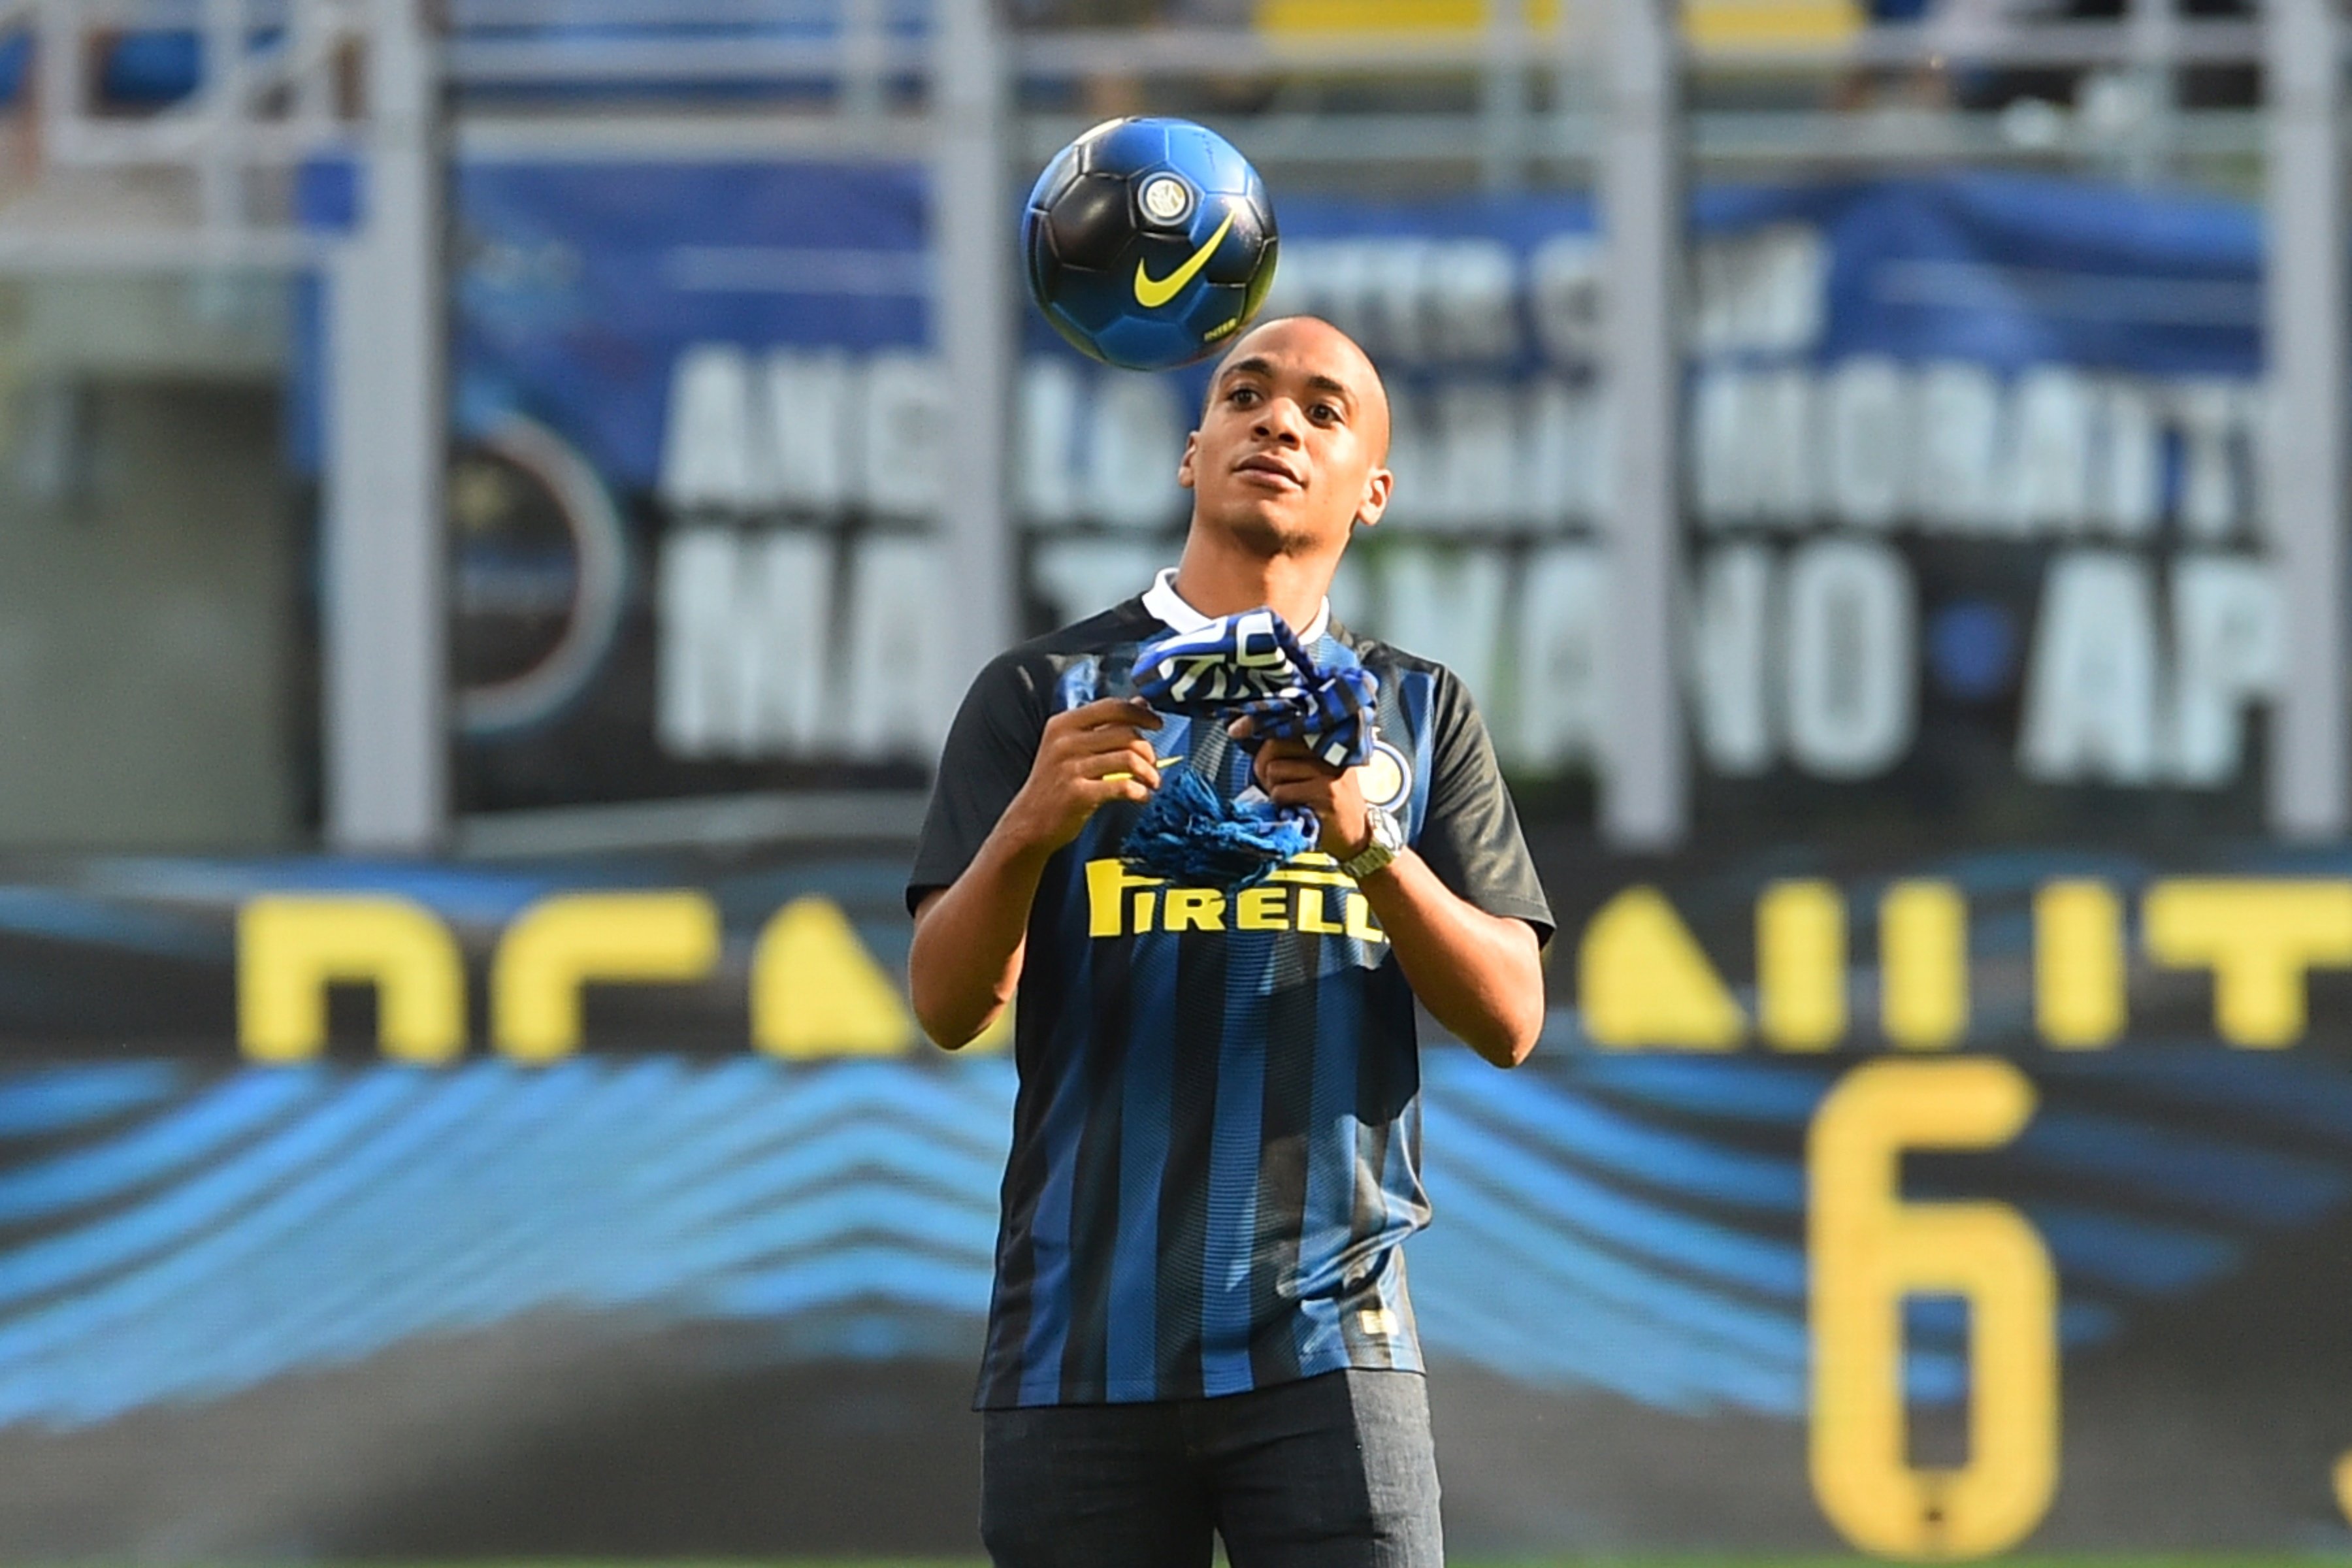 West Ham’s Pursuit Of Inter’s Joao Mario Hits A Wall